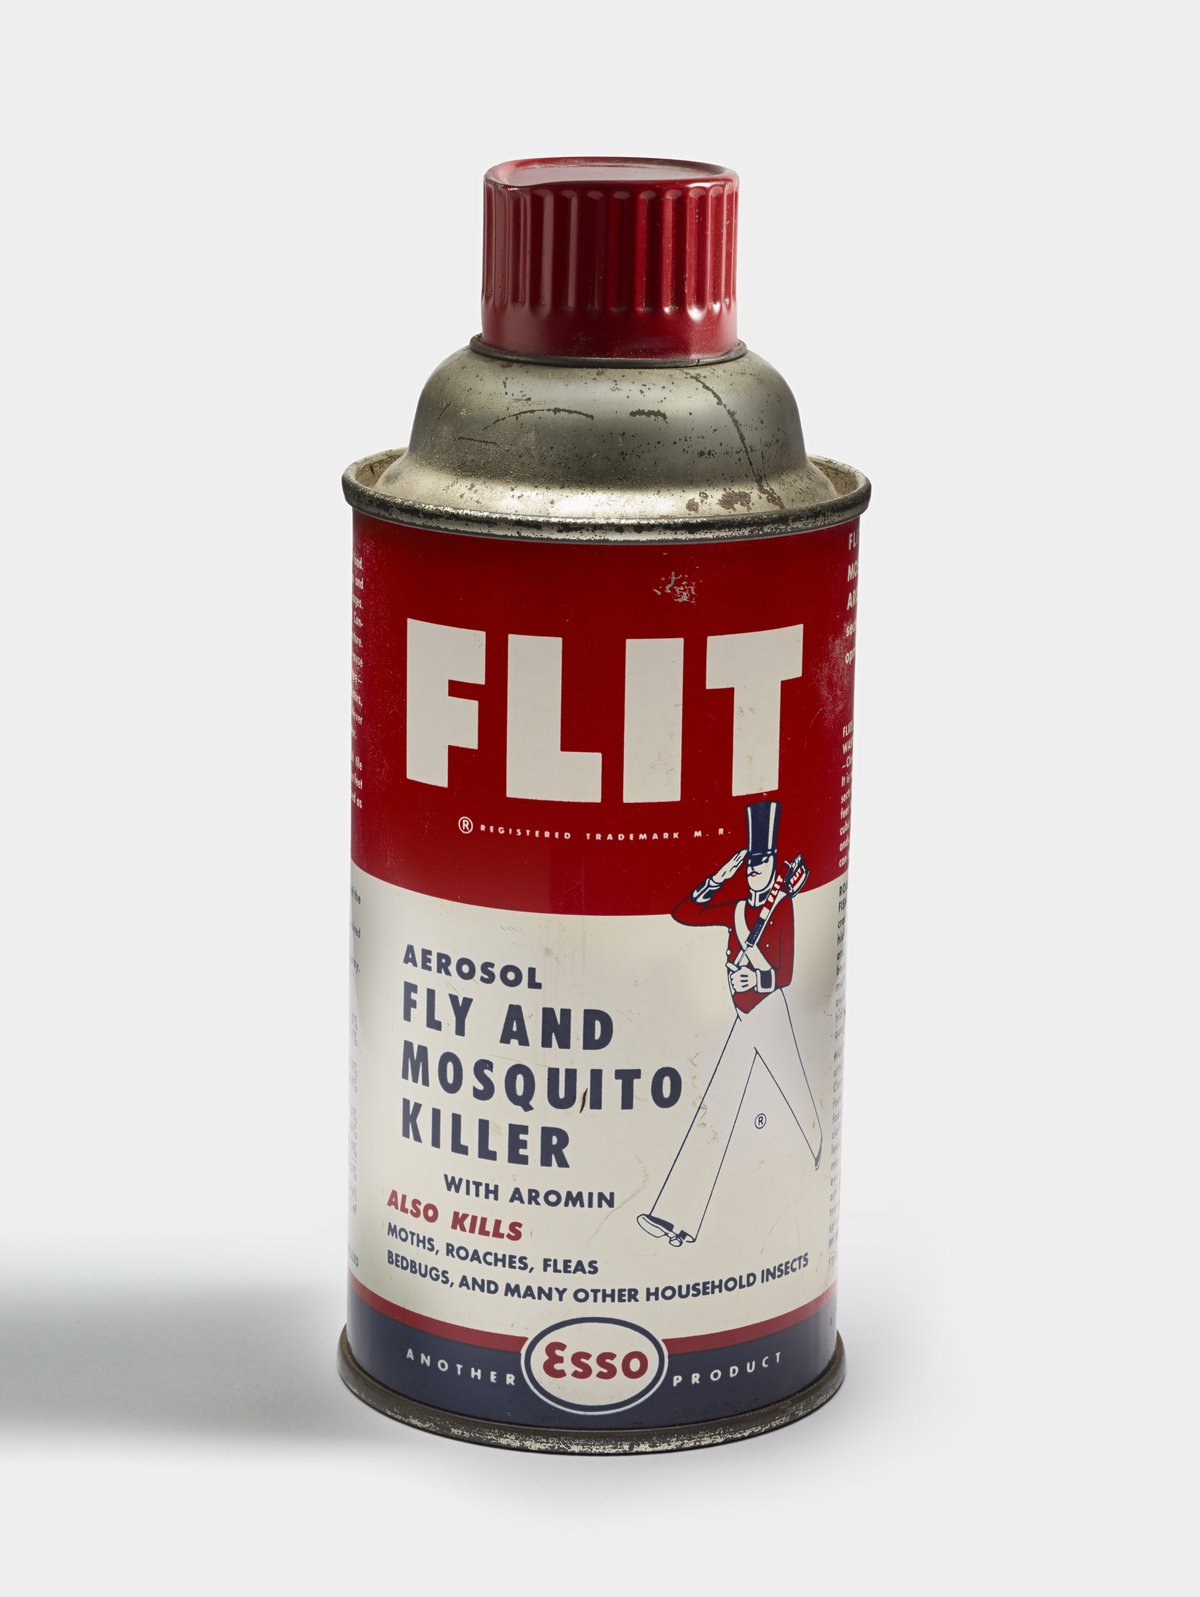 Flit Aerosol Fly and Mosquito Killer - Science History Institute